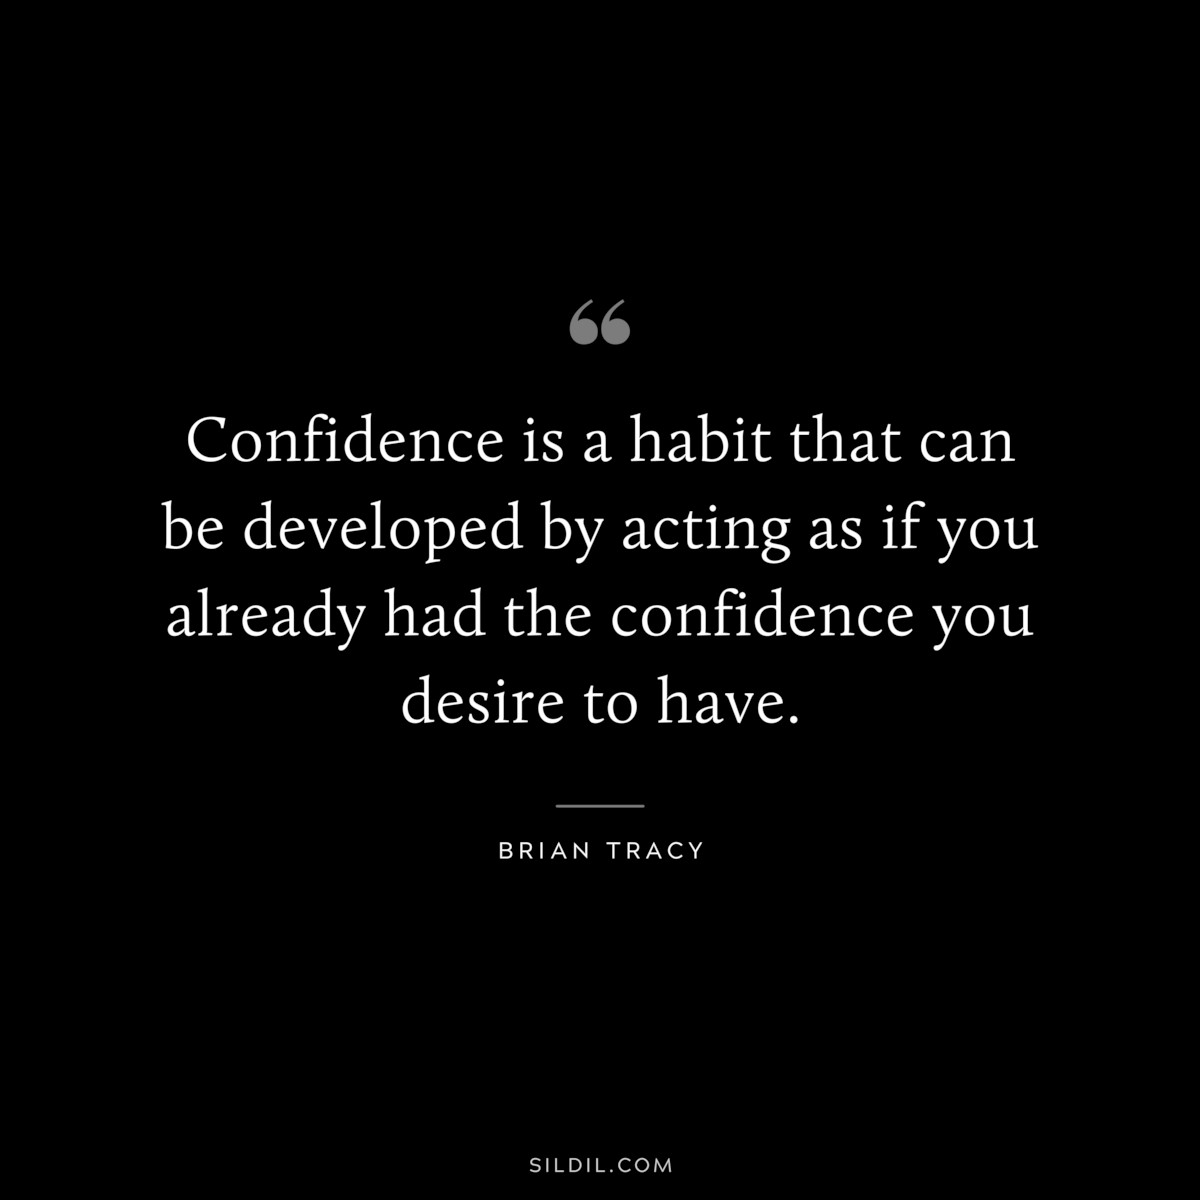 Confidence is a habit that can be developed by acting as if you already had the confidence you desire to have. ― Brian Tracy